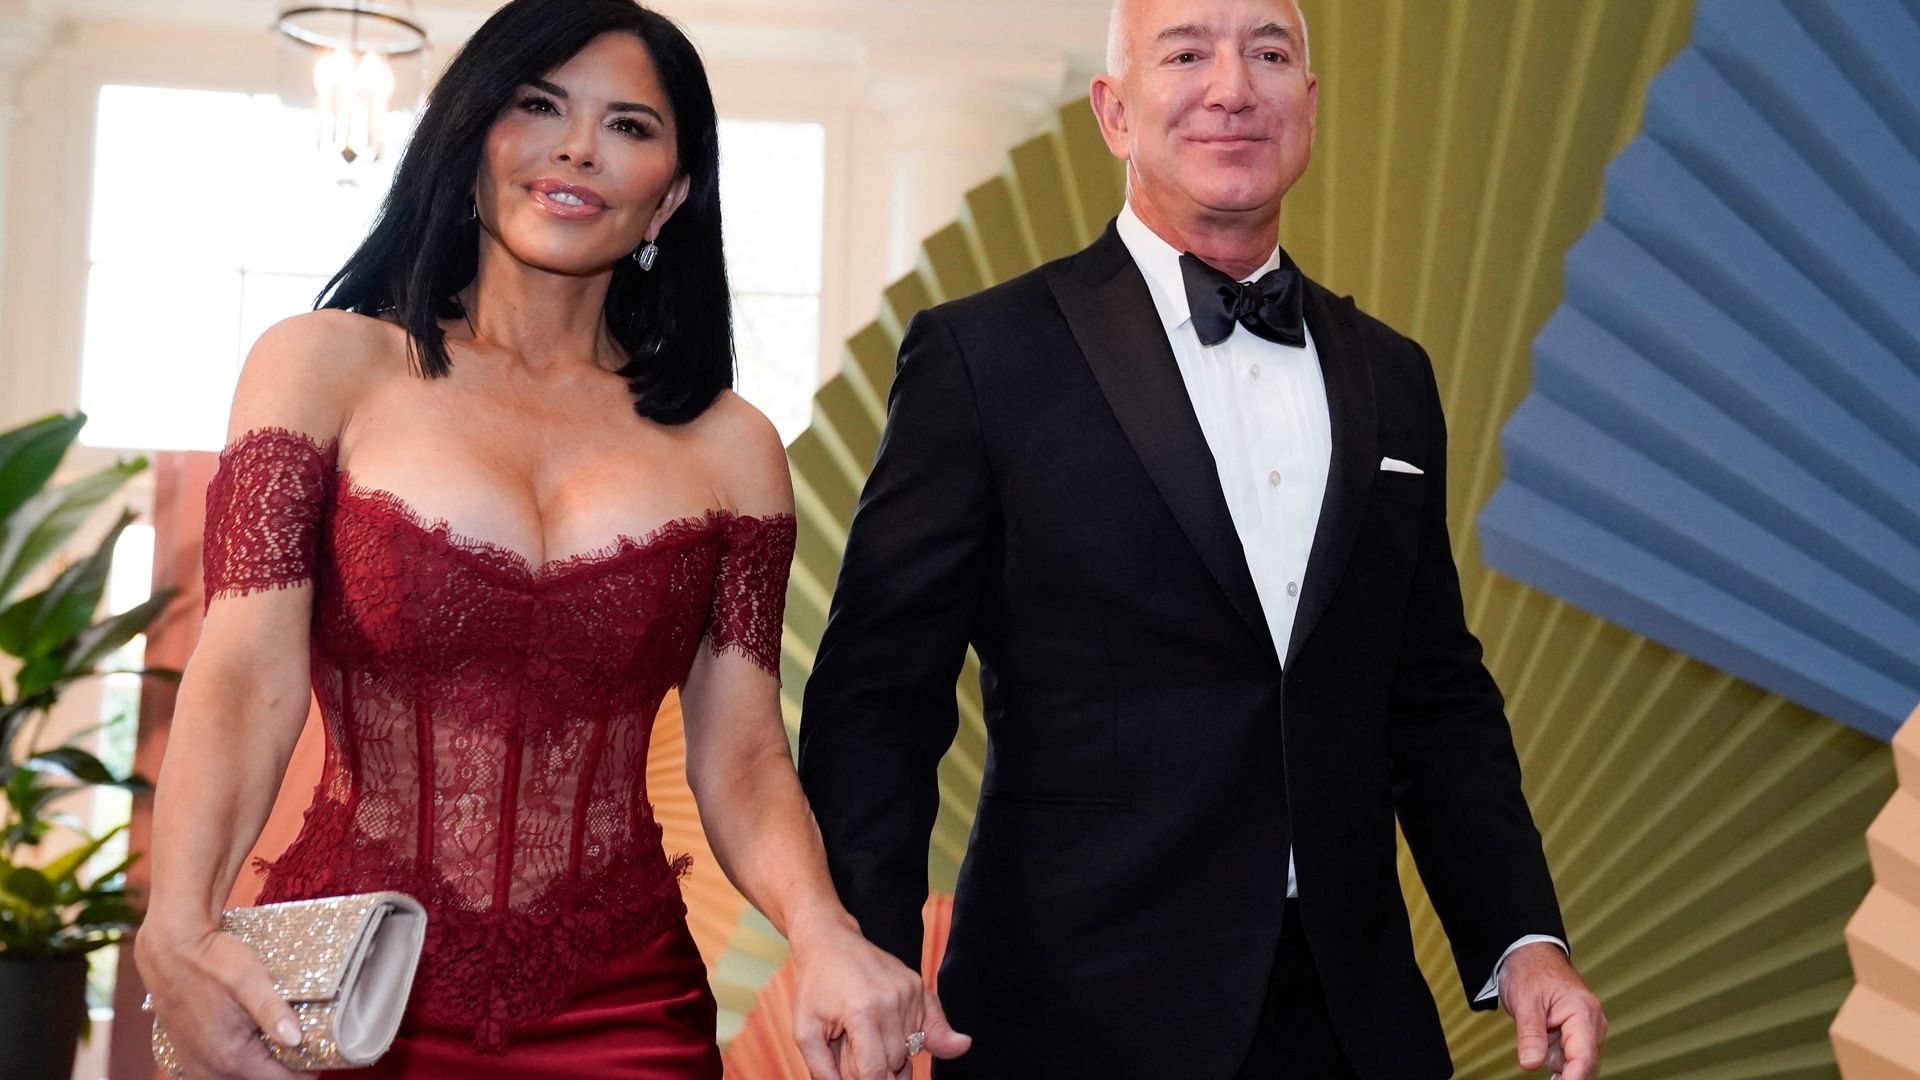 Lauren Sanchez dazzles in $2,200 gown as she and Jeff Bezos lead the glamorous arrivals at Joe Biden's state dinner